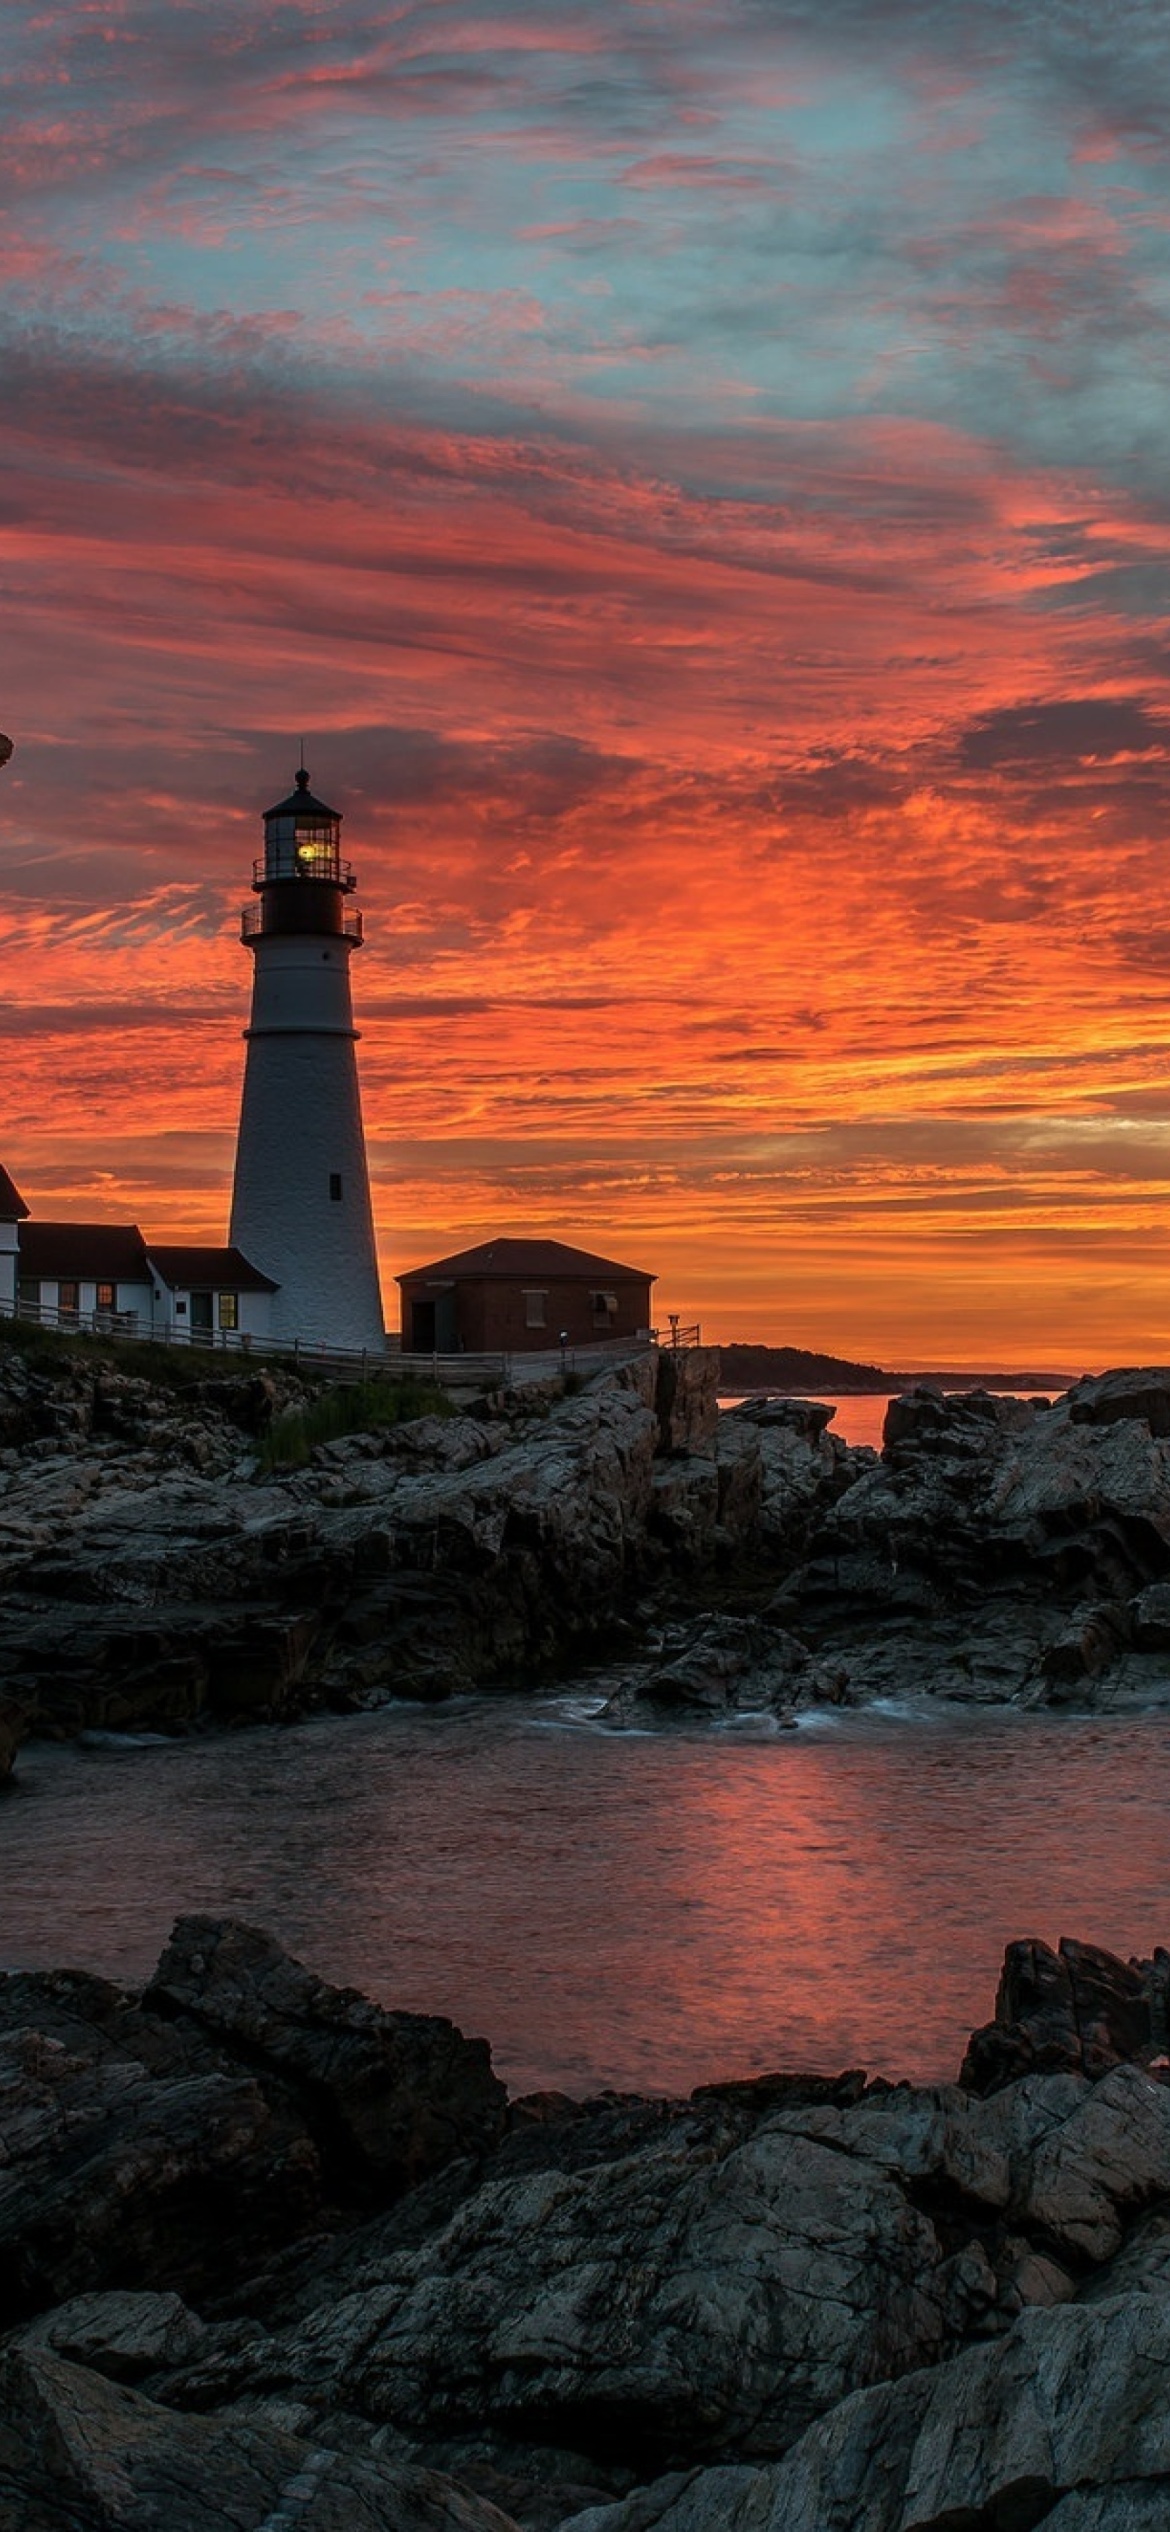 Sunset and lighthouse wallpaper 1170x2532